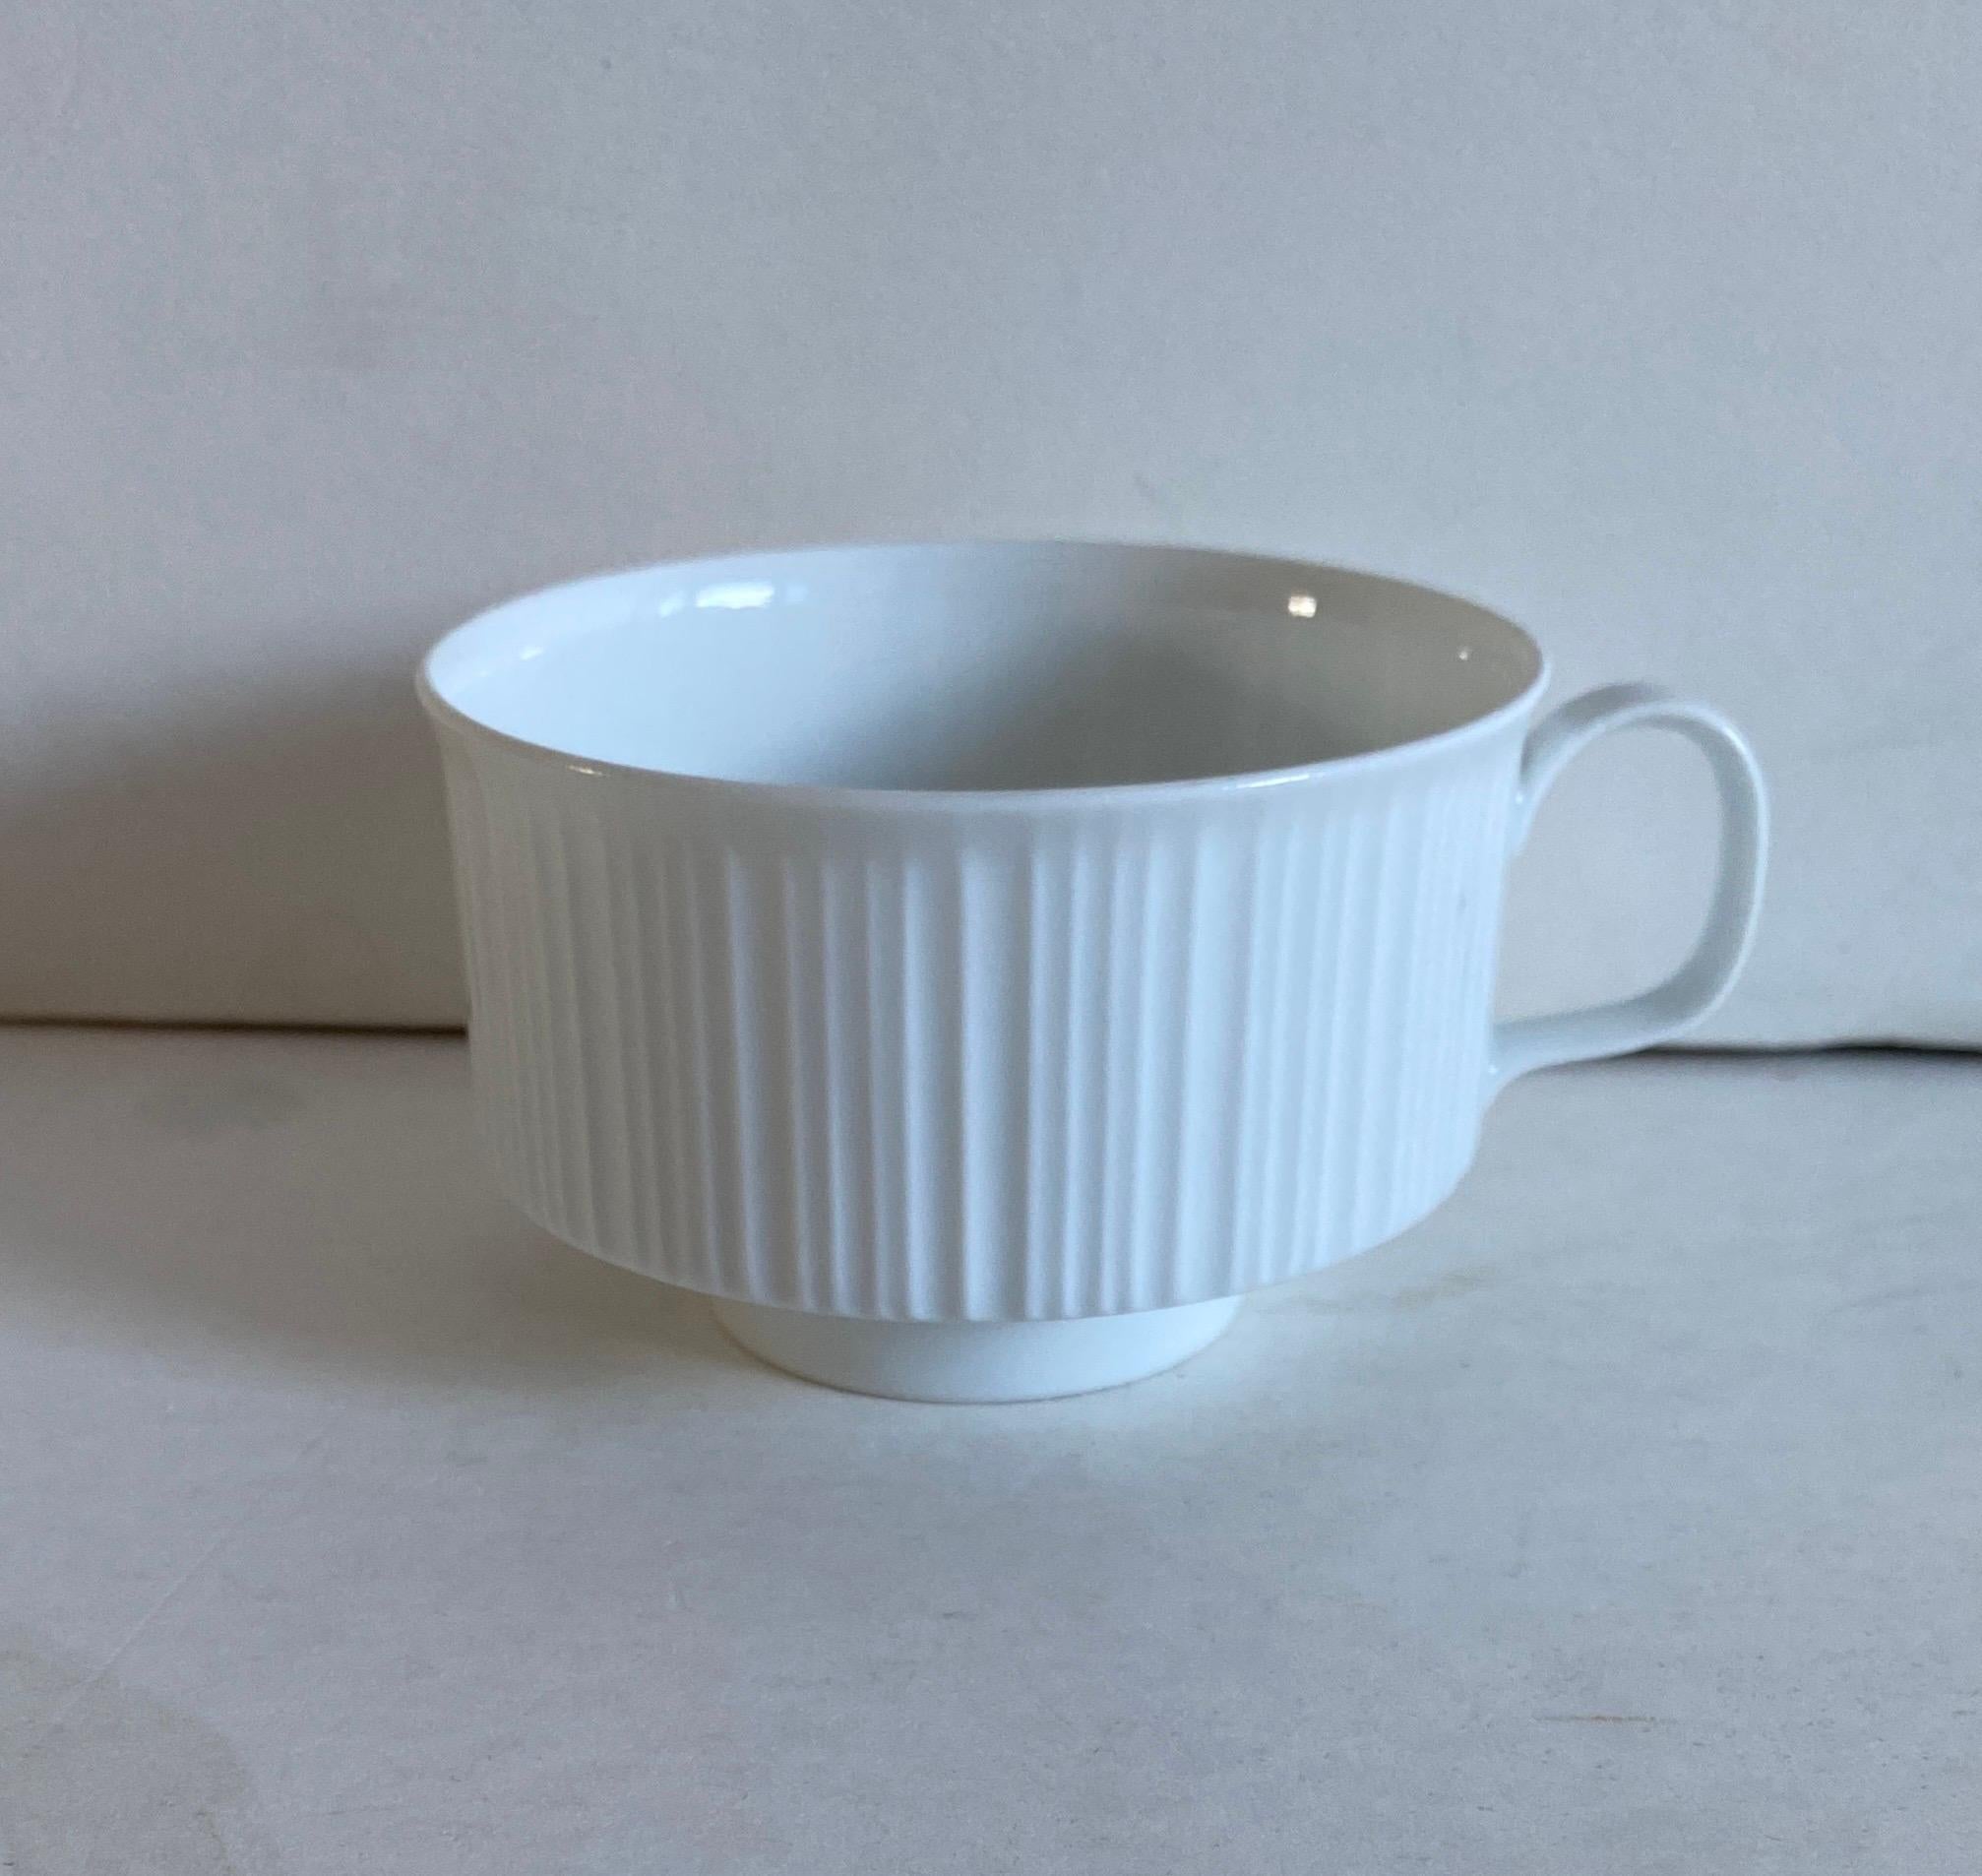 A set of 6 (six) Tapio Wirkkala Rosenthal Studio-line porcelain cups in the variations pattern.

Signed.

White porcelain with a ribbed design.

Dimensions: 2-1/4 inches H x 3-5/8 inches W.

 